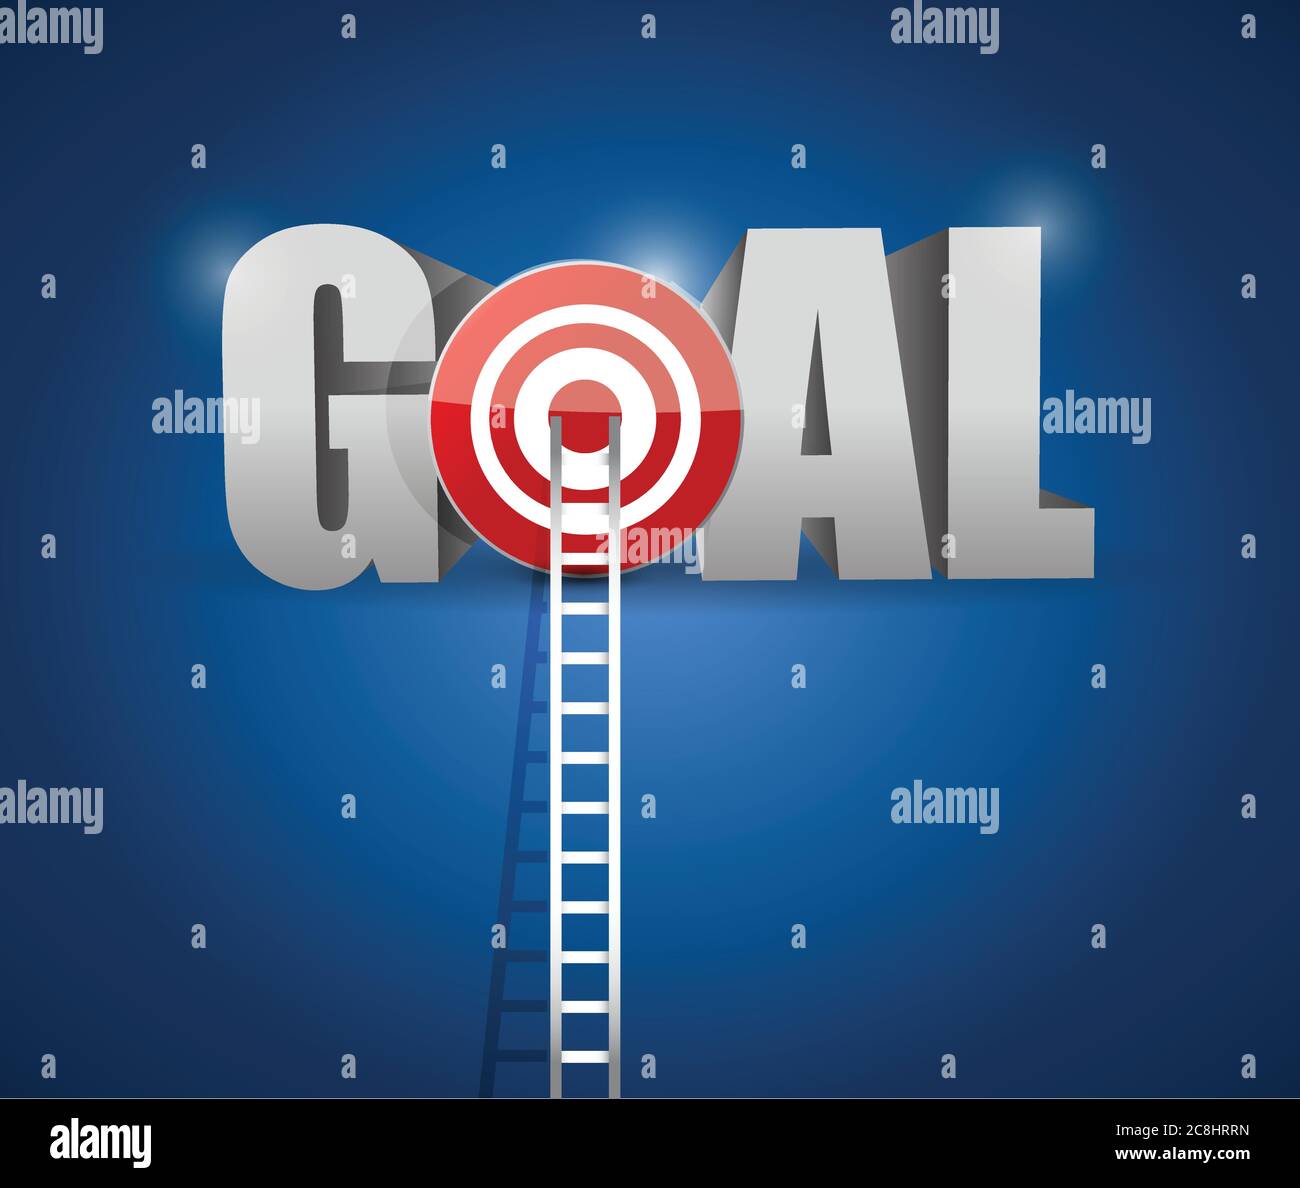 Target You Goal Stairs Concept Illustration Design Over A Blue Background Stock Vector Image Art Alamy